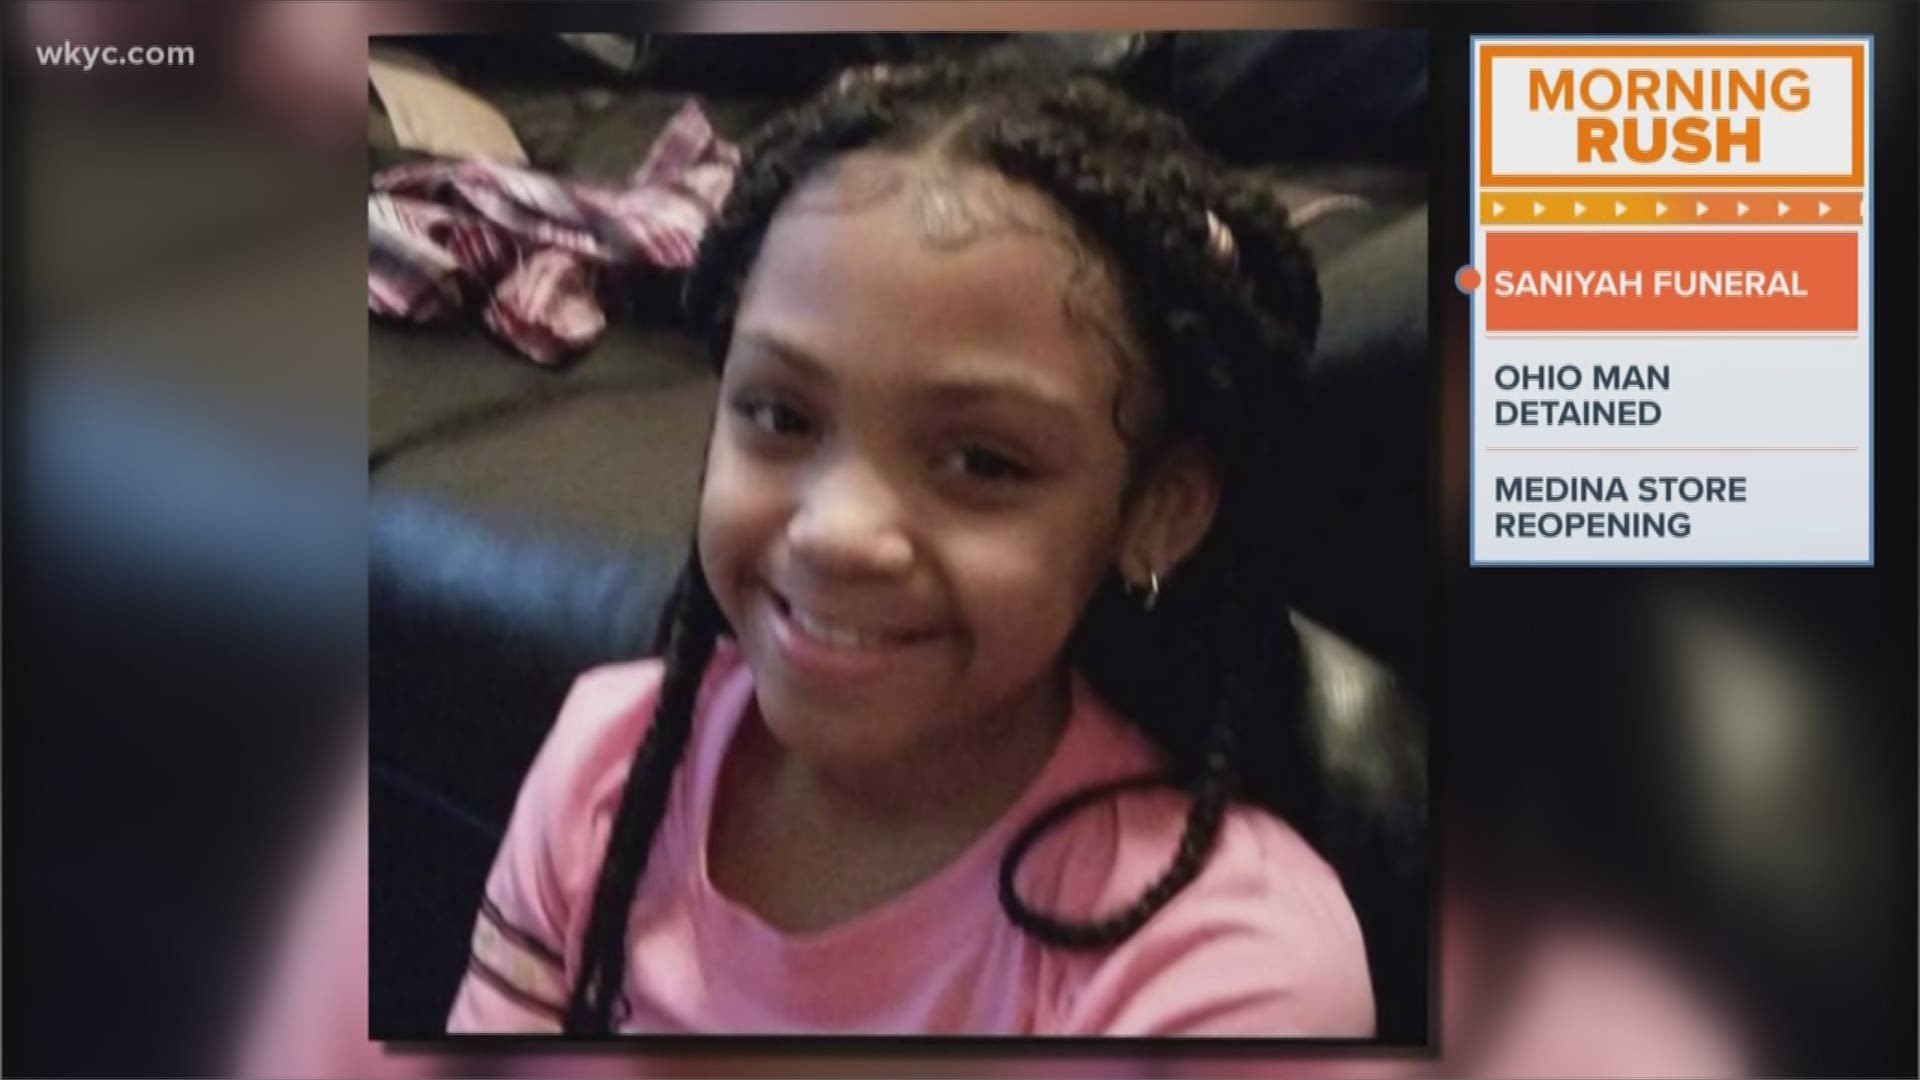 June 29, 2018: Family, friends and loved ones will gather Friday morning to say their goodbyes to 9-year-old Saniyah Nicholson who was killed in a Cleveland shooting last week.